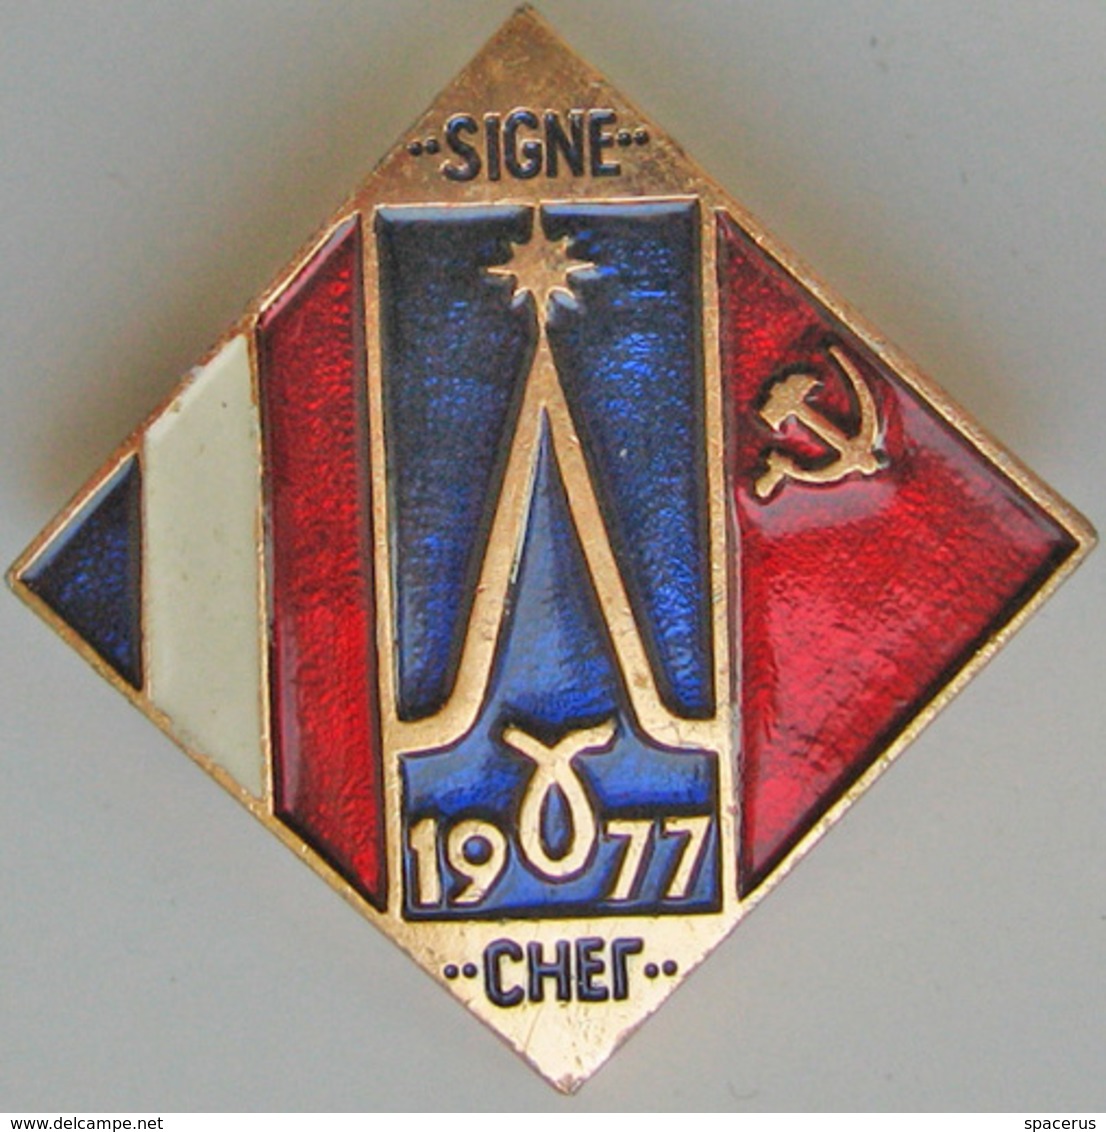 150 Space Soviet Russian Pin. INTERKOSMOS USSR-France. Expirience Signe - Space